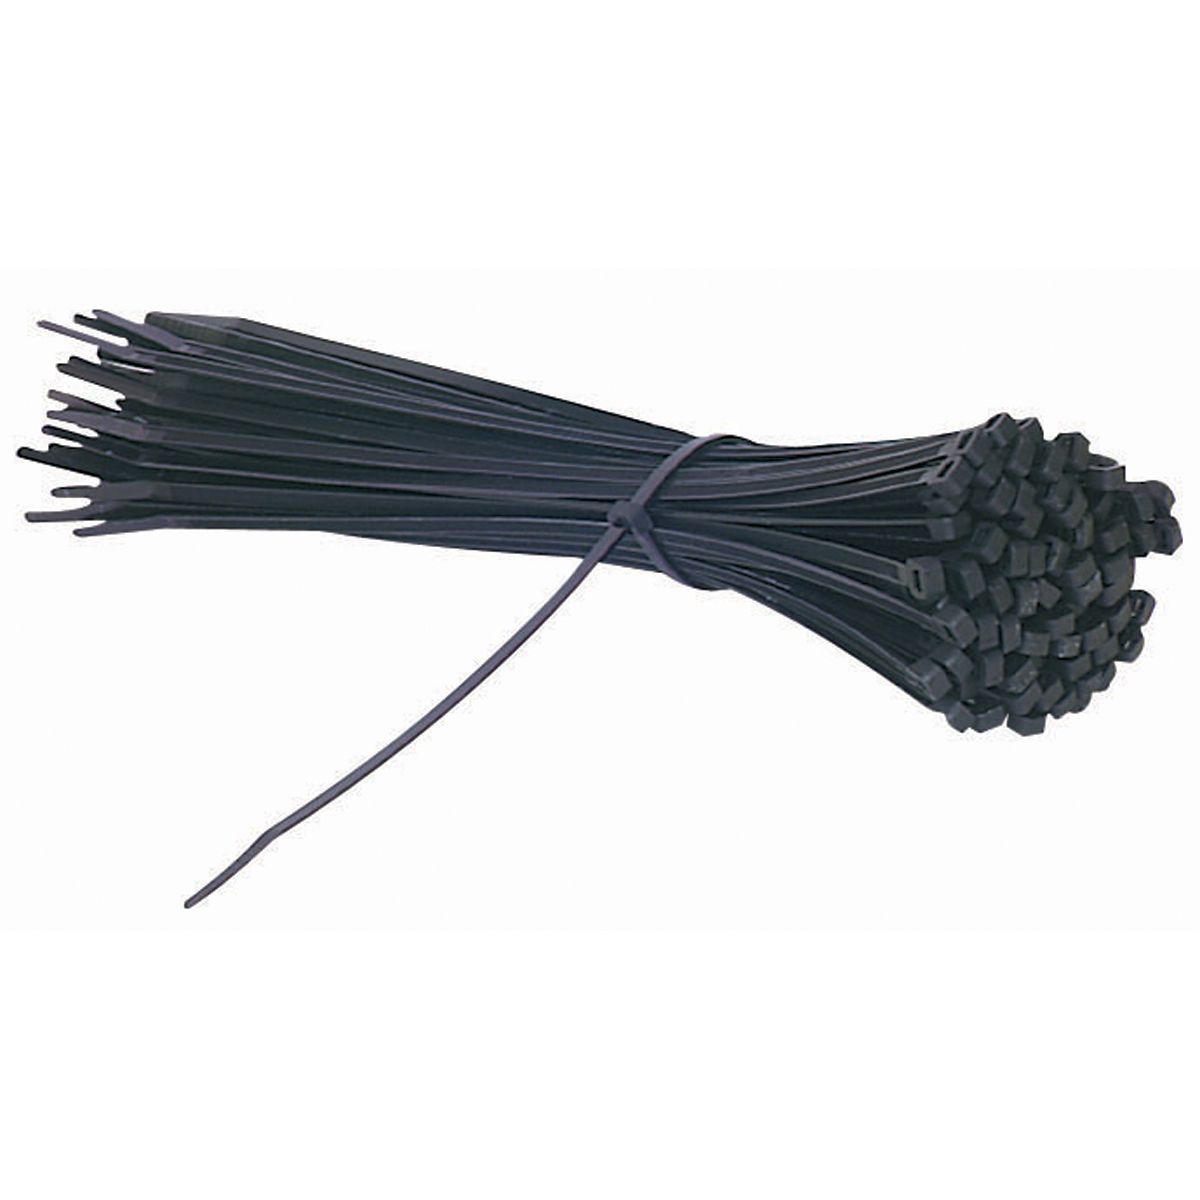 11 in. Black Cable Ties, 100 Pack